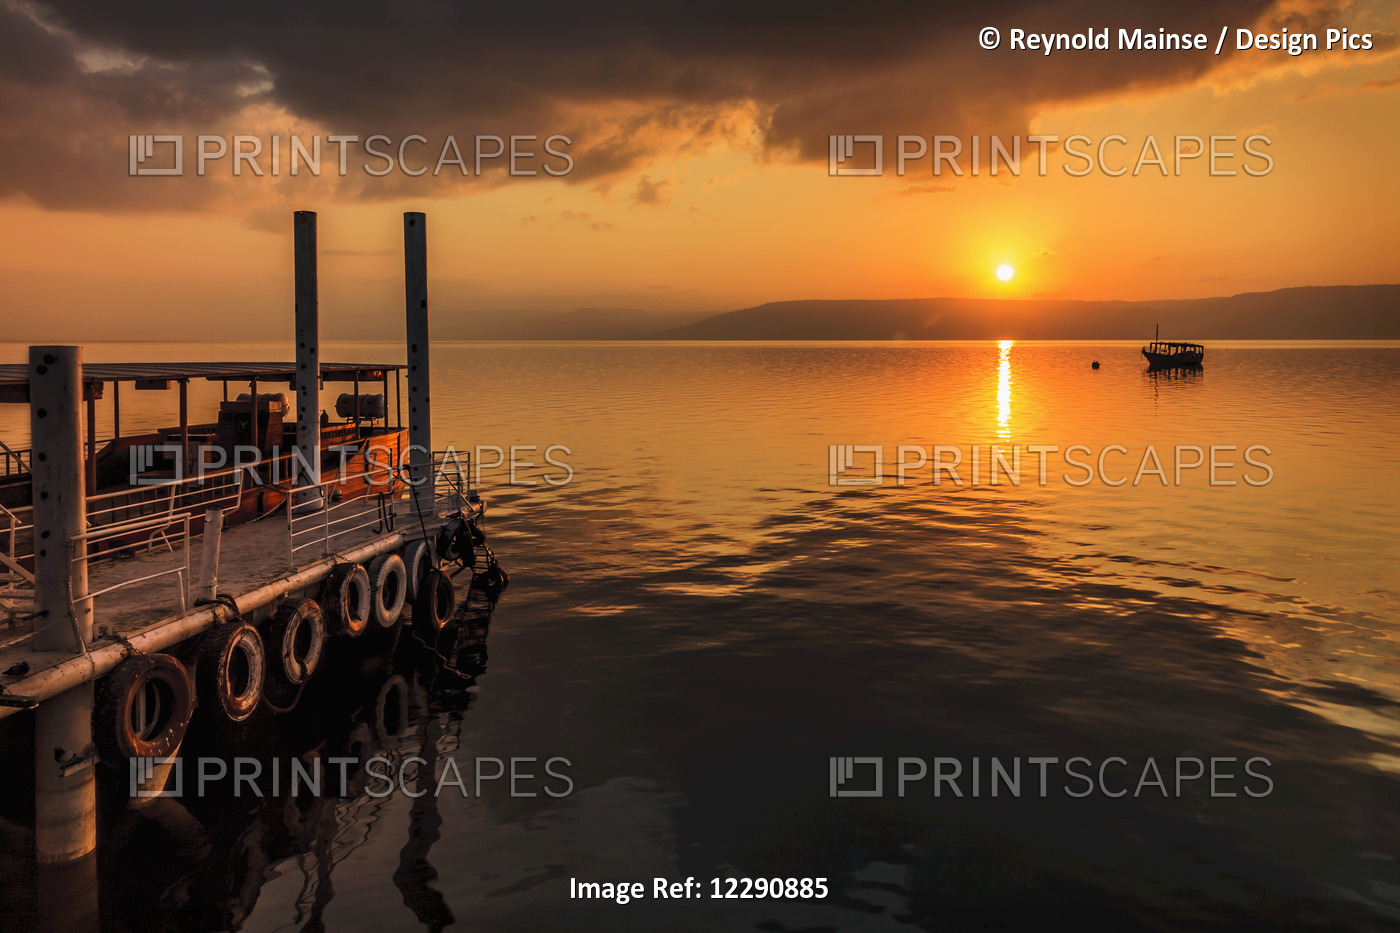 A Calm Settles On The Sea Of Galilee, Just After A Storm; Galilee, Israel